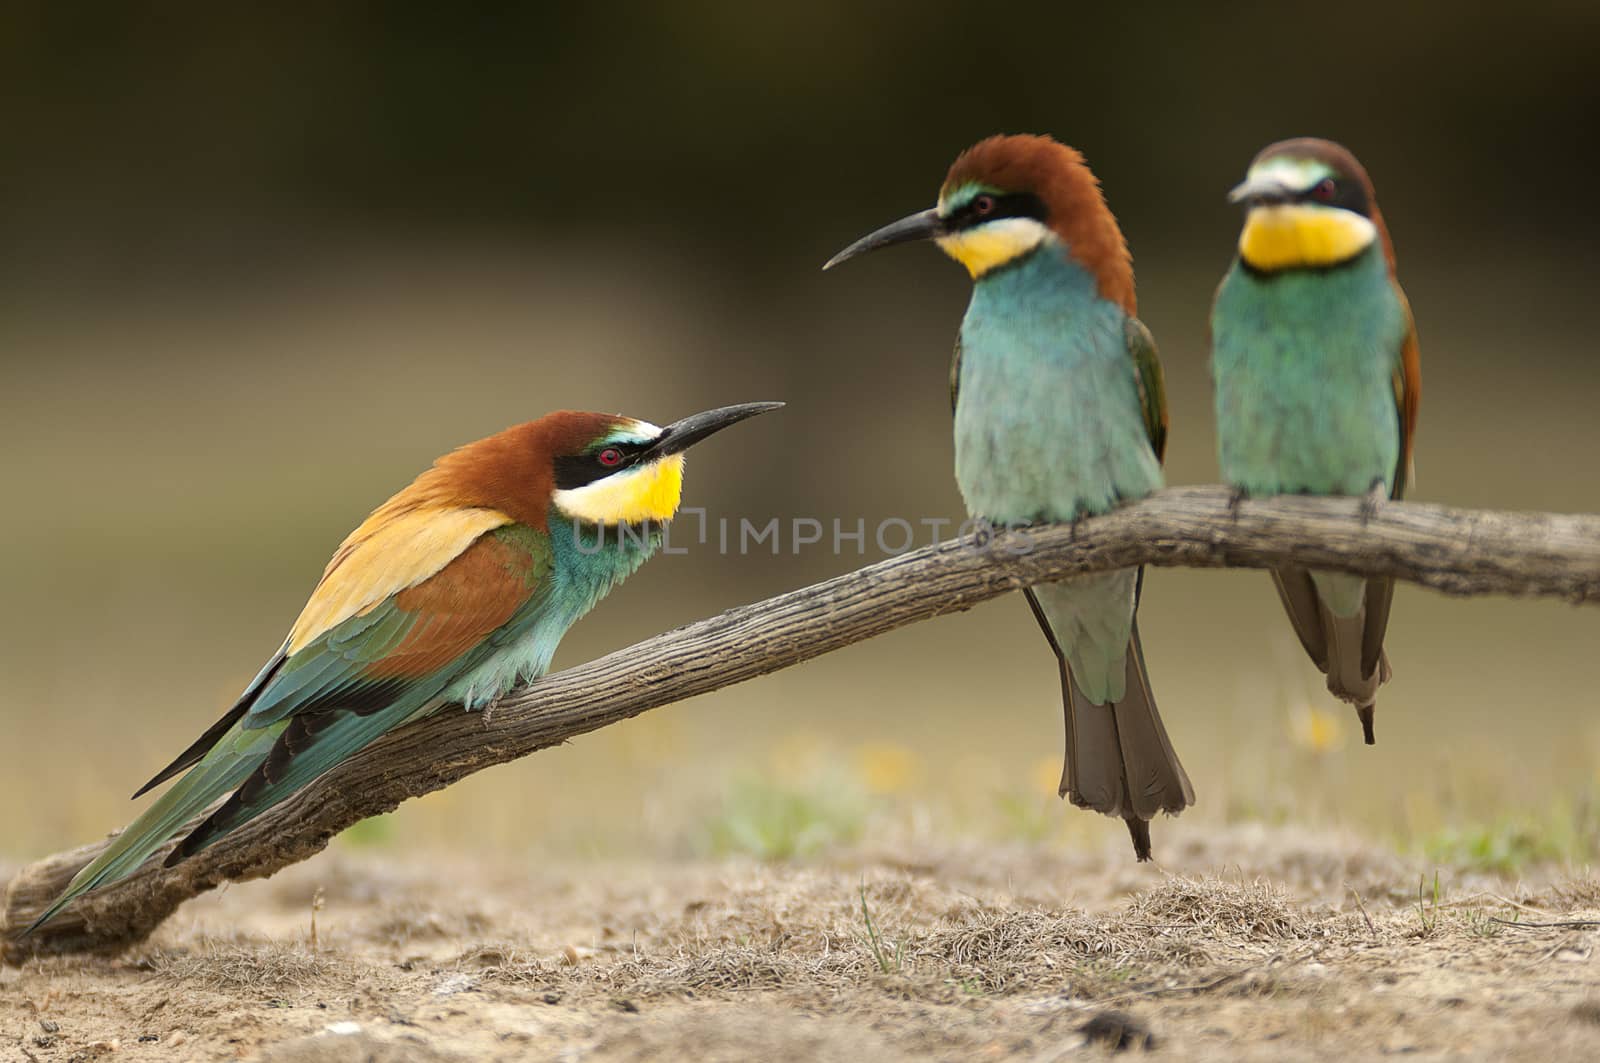 European bee-eater (Merops apiaster), three perched on a branch, fight